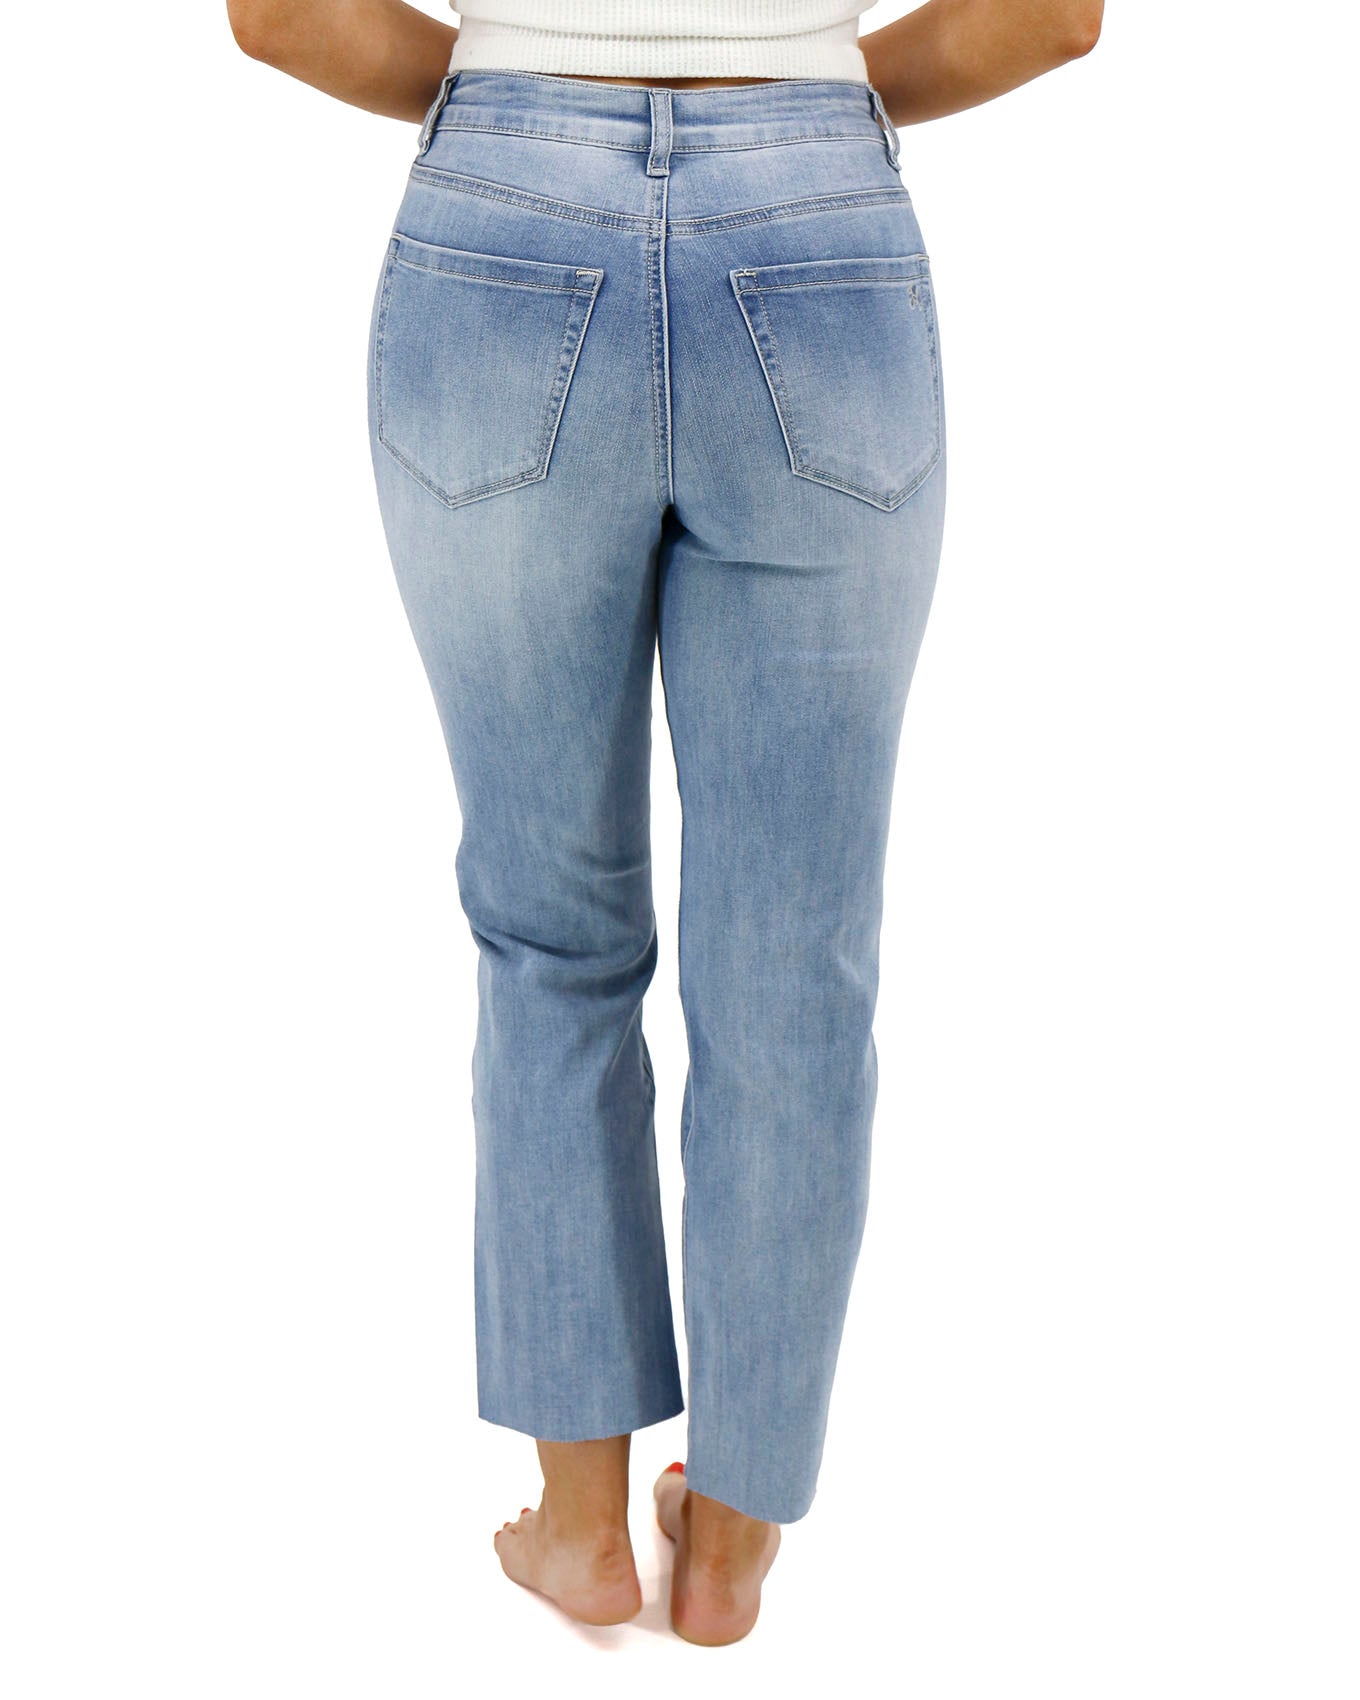 Back stock shot of Light-Mid Wash Mel’s Fave Non Distressed Straight Leg Cropped Denim